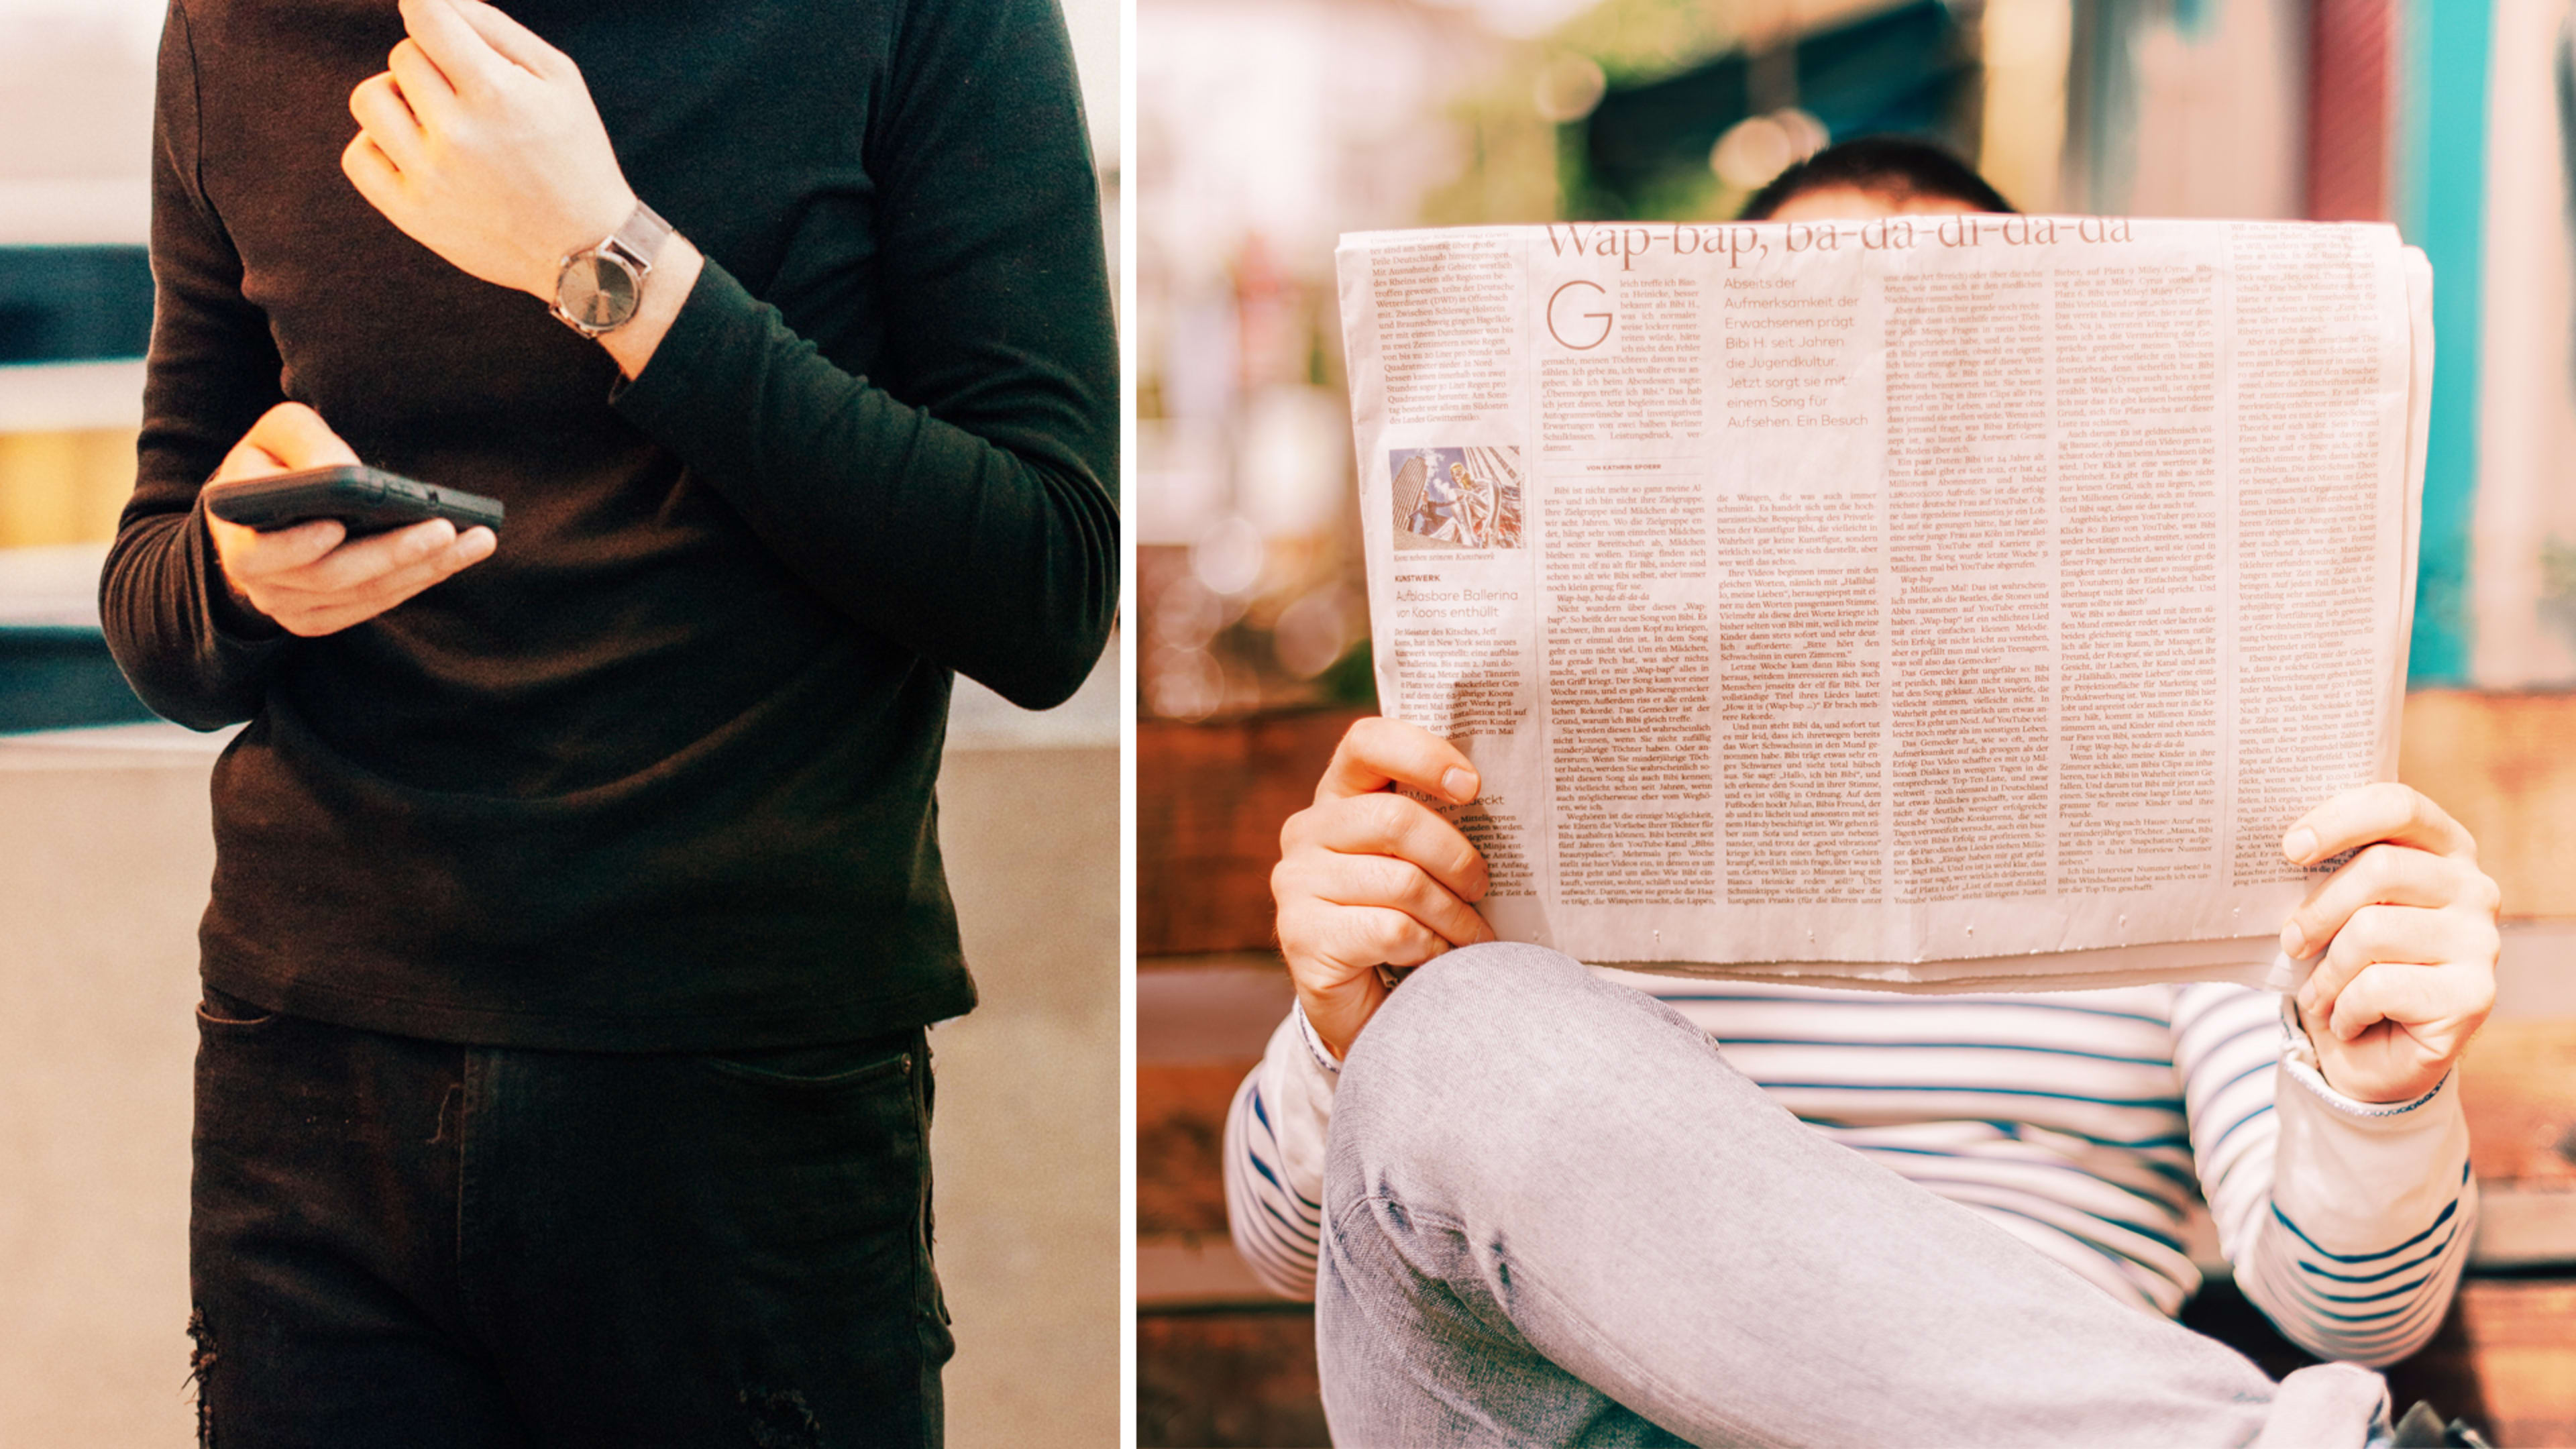 It’s official: More people get news from social media than newspapers